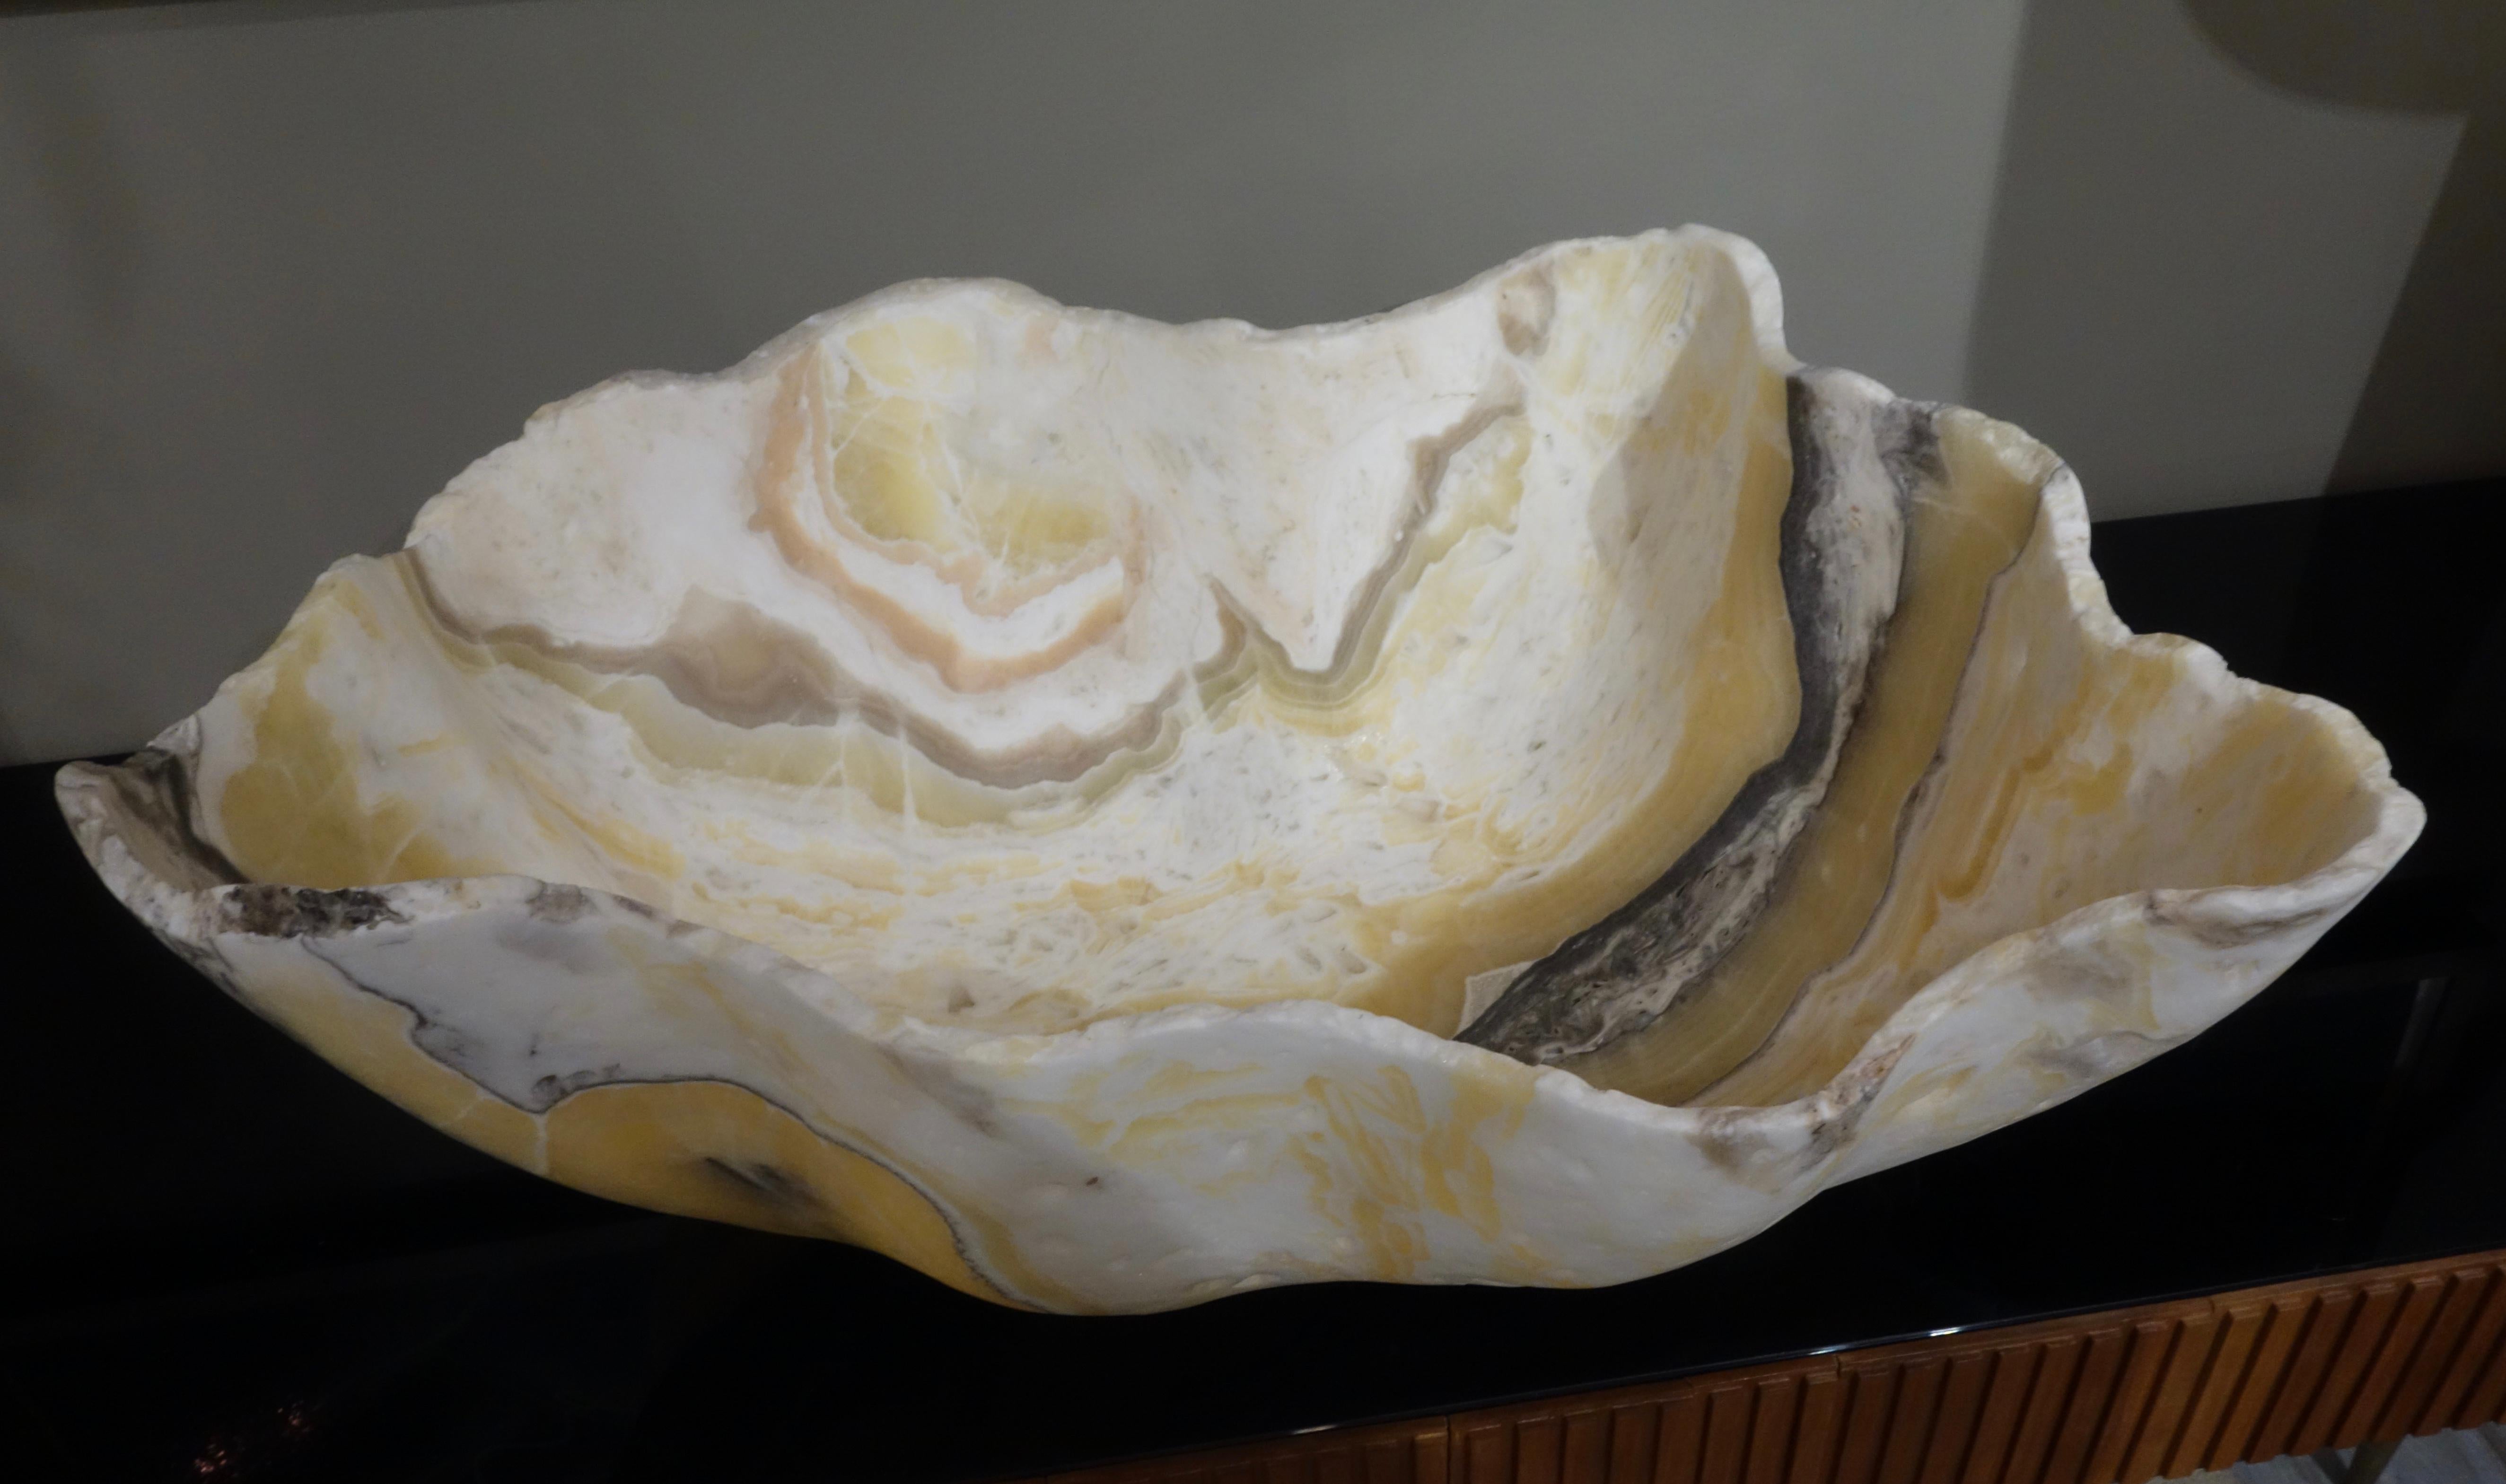 A very large hand carved Mexican raw edge onyx bowl or centerpiece in undulating colors of white, gold, charcoal, taupe and blush with natural negative spaces.